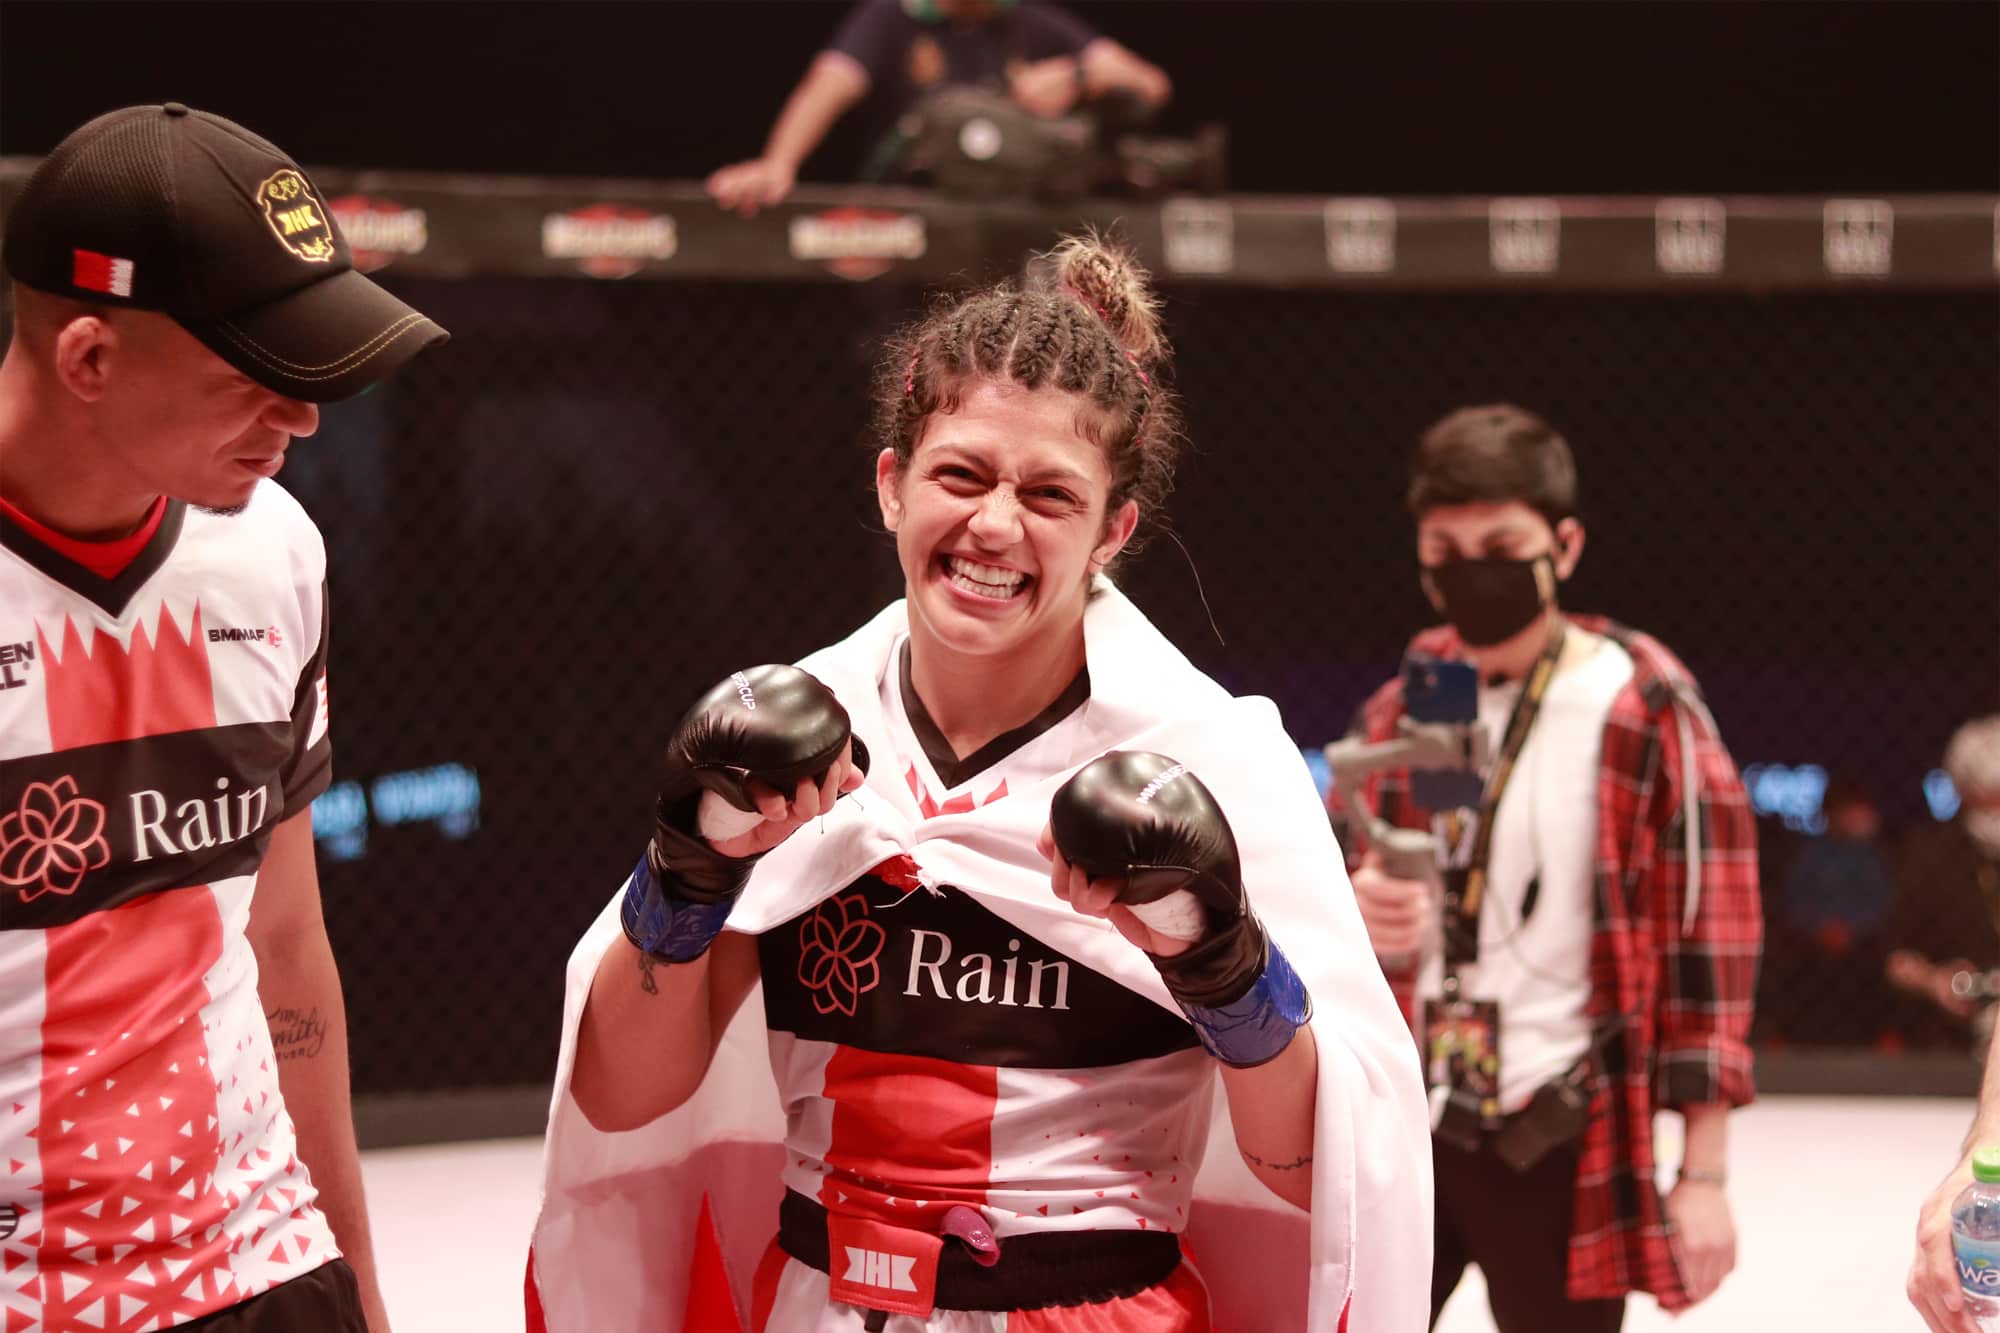 BJJ Black Belt Bianca Basilio Ready to Take the MMA World by Storm Following Transition From BJJ